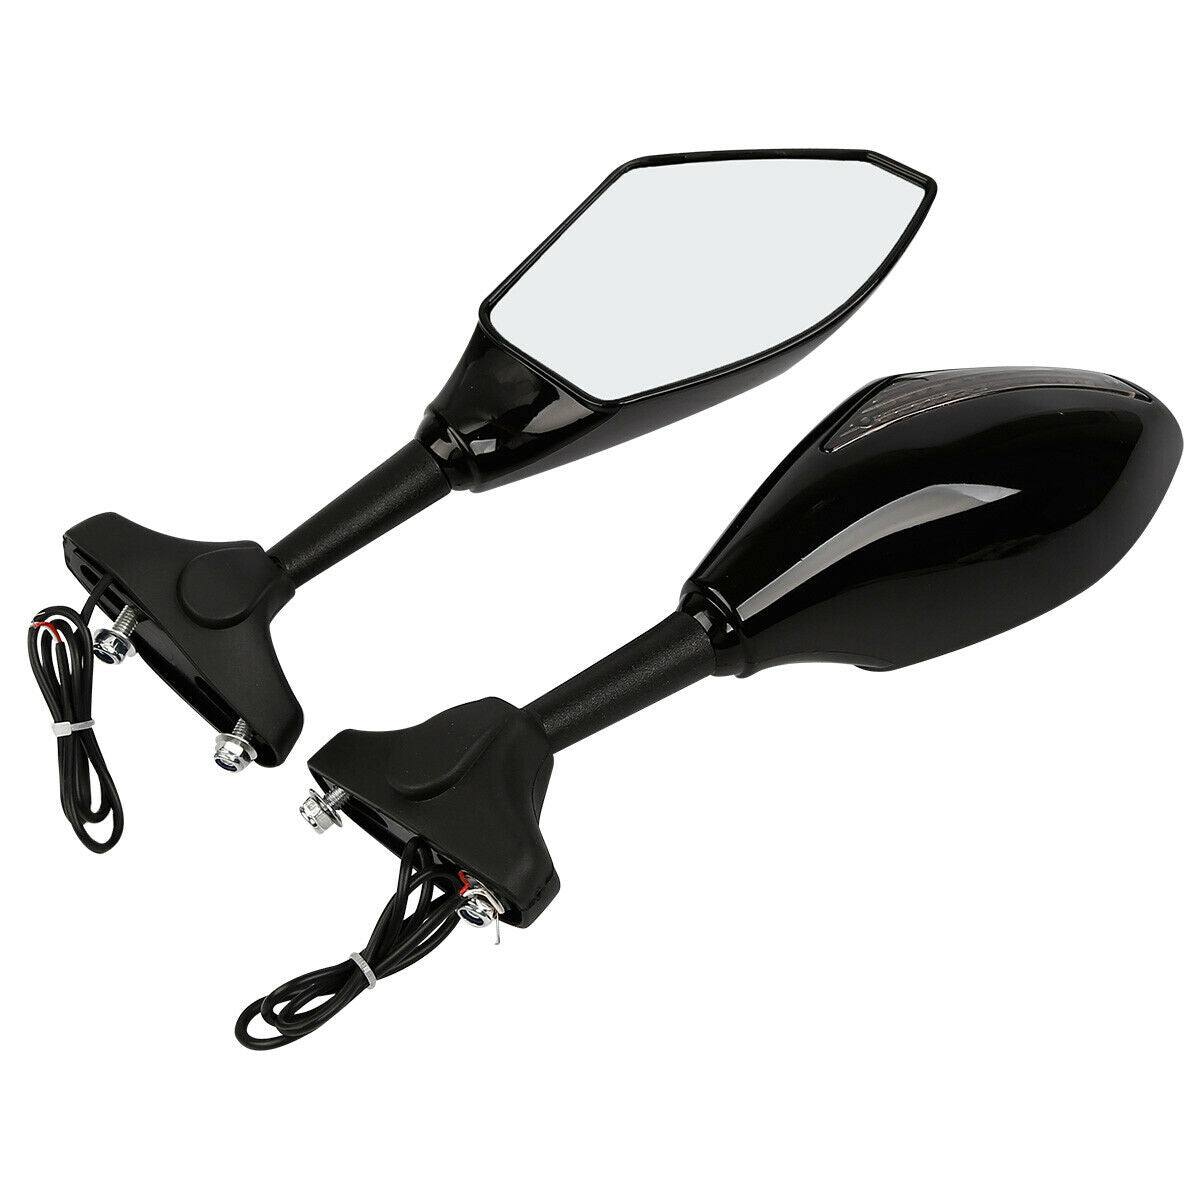 Rear View Mirrors w/ LED Turn Signals For Honda CBR1000 CBR1000RR 2004-2007 2006 - Moto Life Products